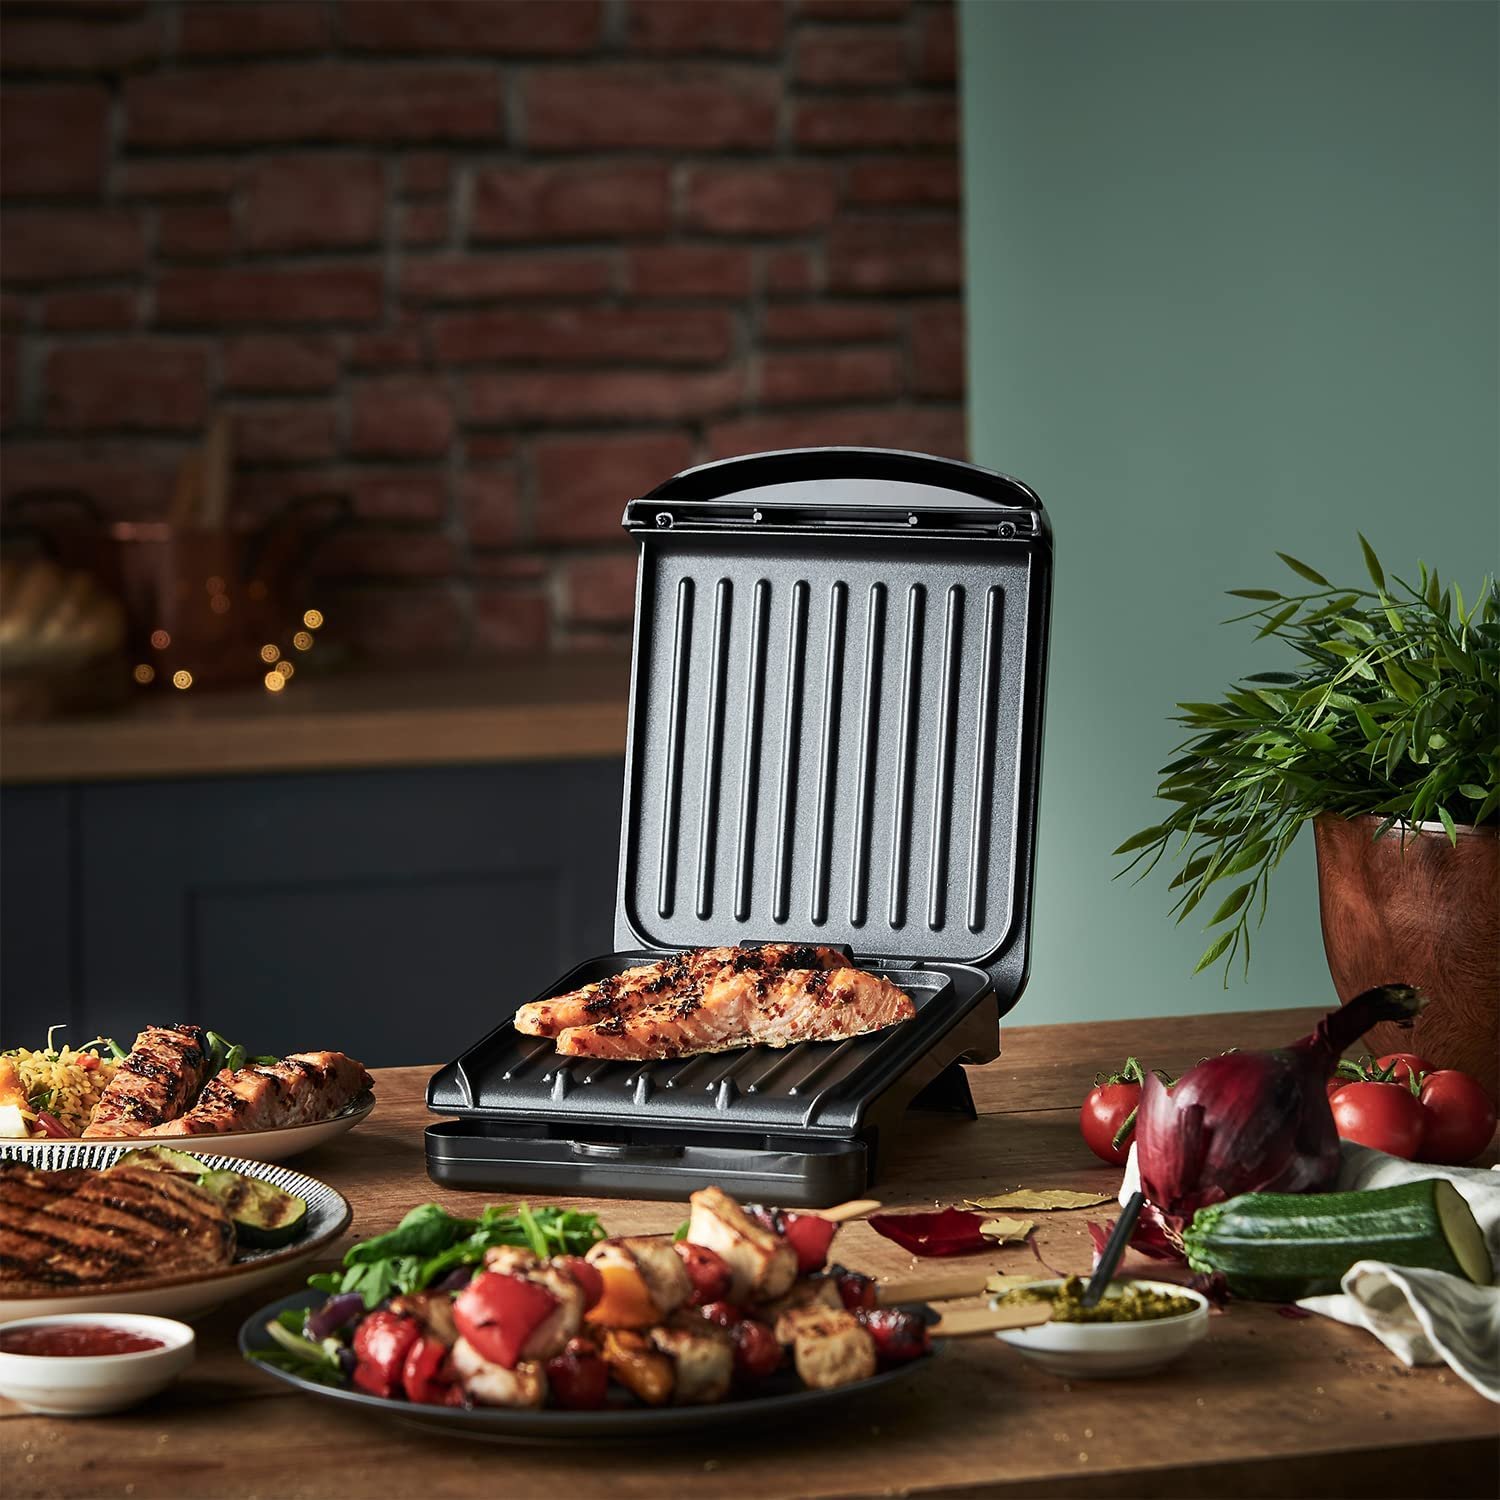 760W, entertaining, small fit, electric grill black, George Foreman 25800